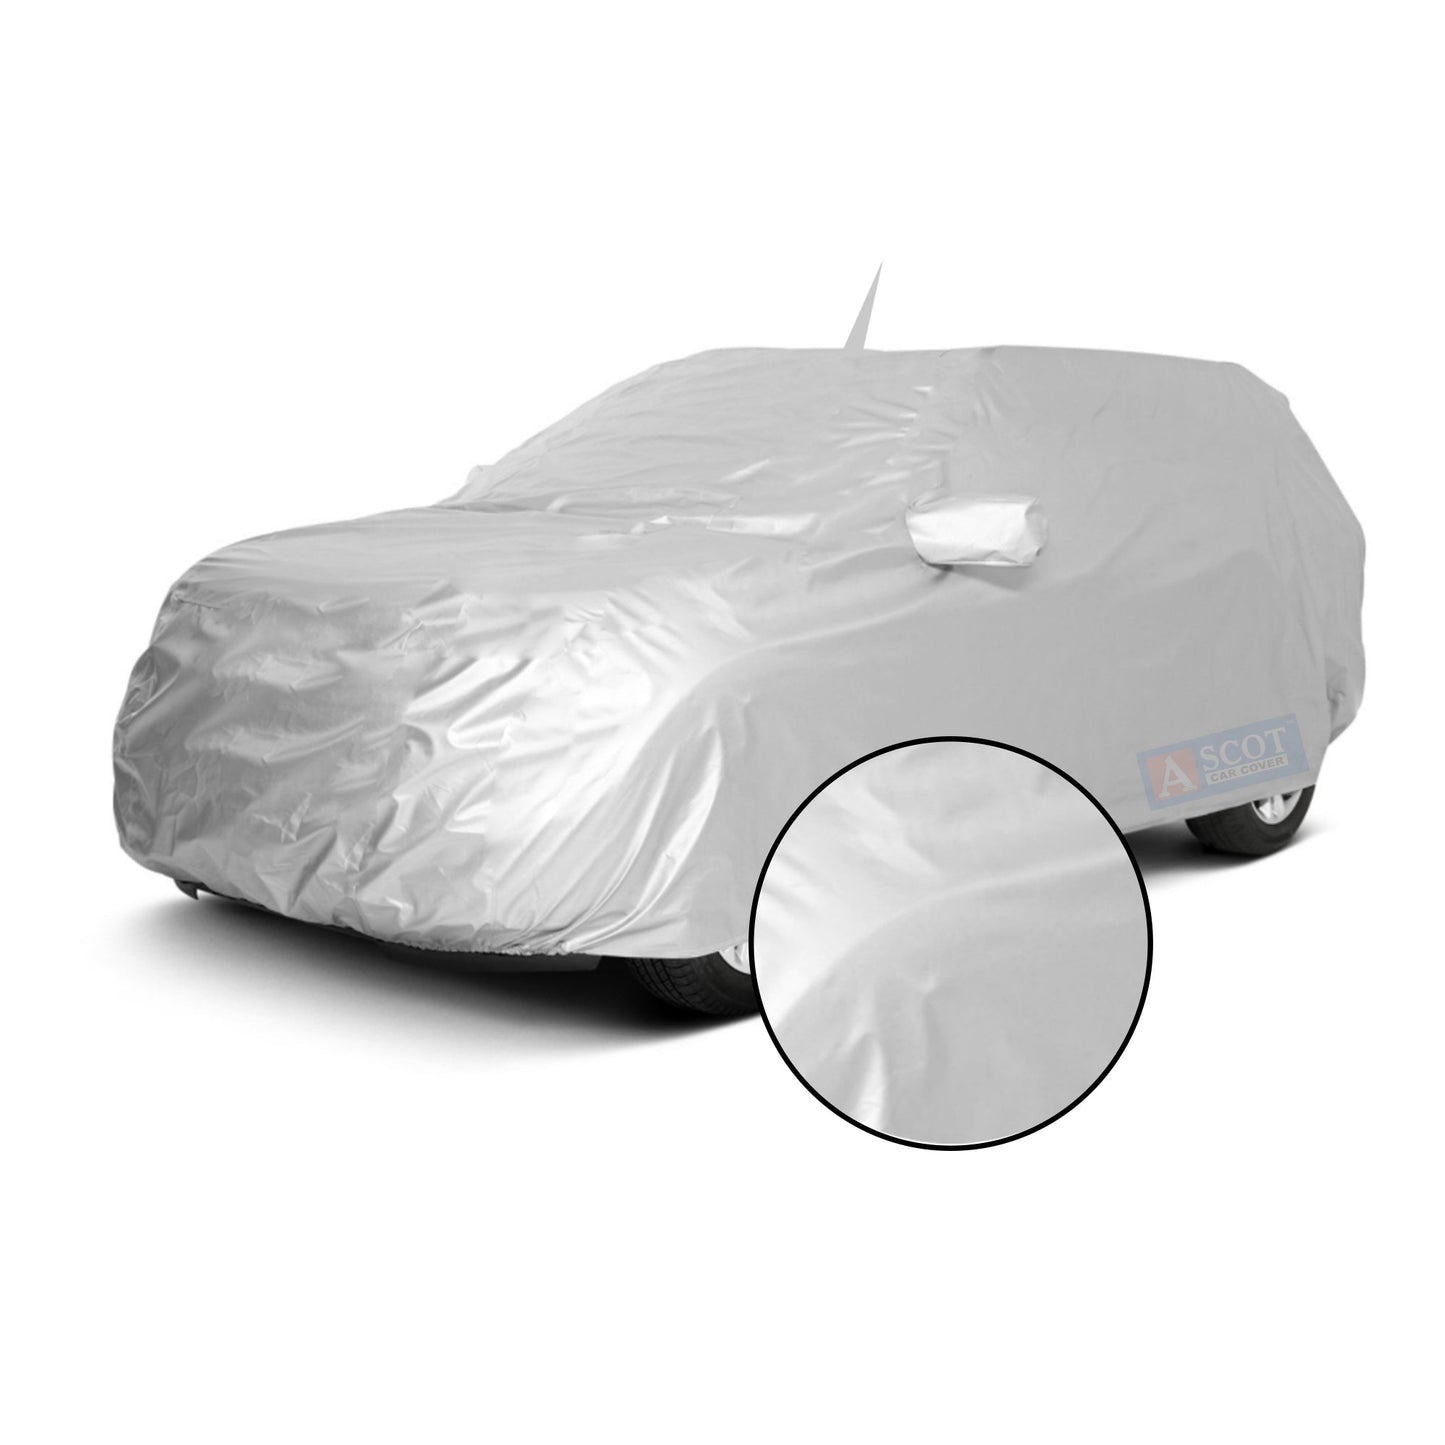 Ascot Ford Endeavour Car Body Cover Dust Proof, Trippel Stitched